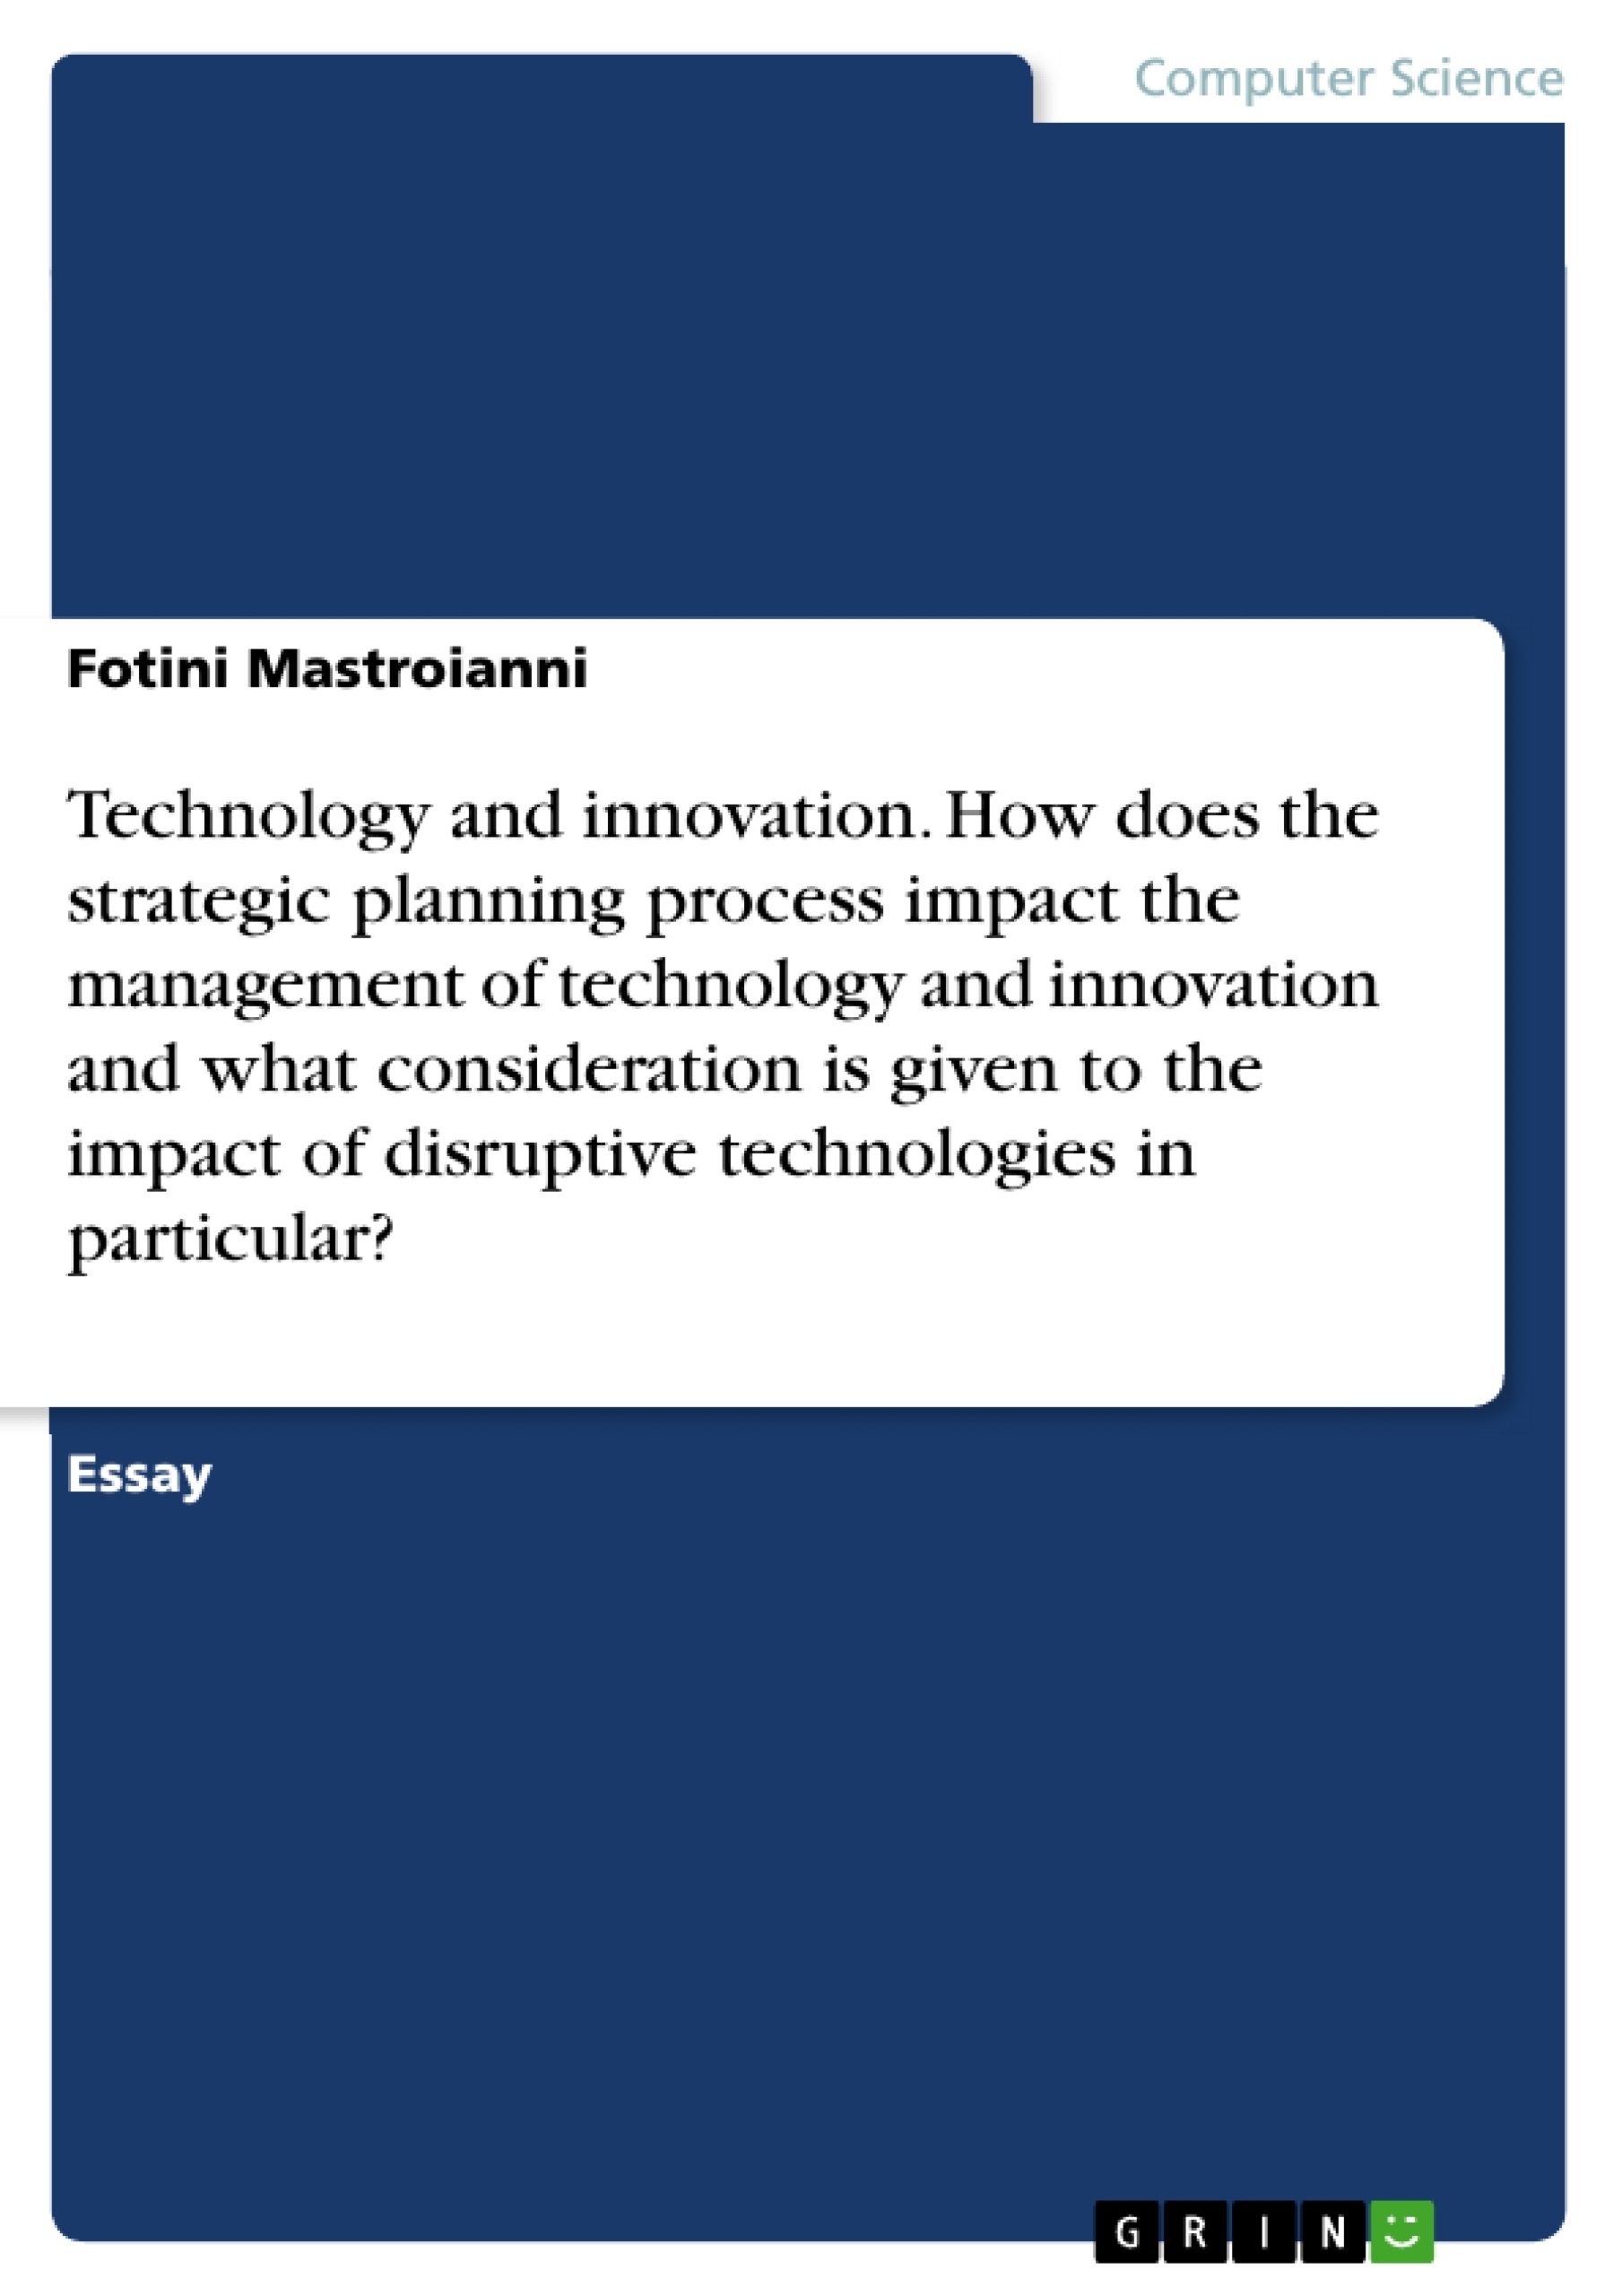 Título: Technology and innovation. How does the strategic planning process impact the management of technology and innovation and what consideration is given to the impact of disruptive technologies in particular?